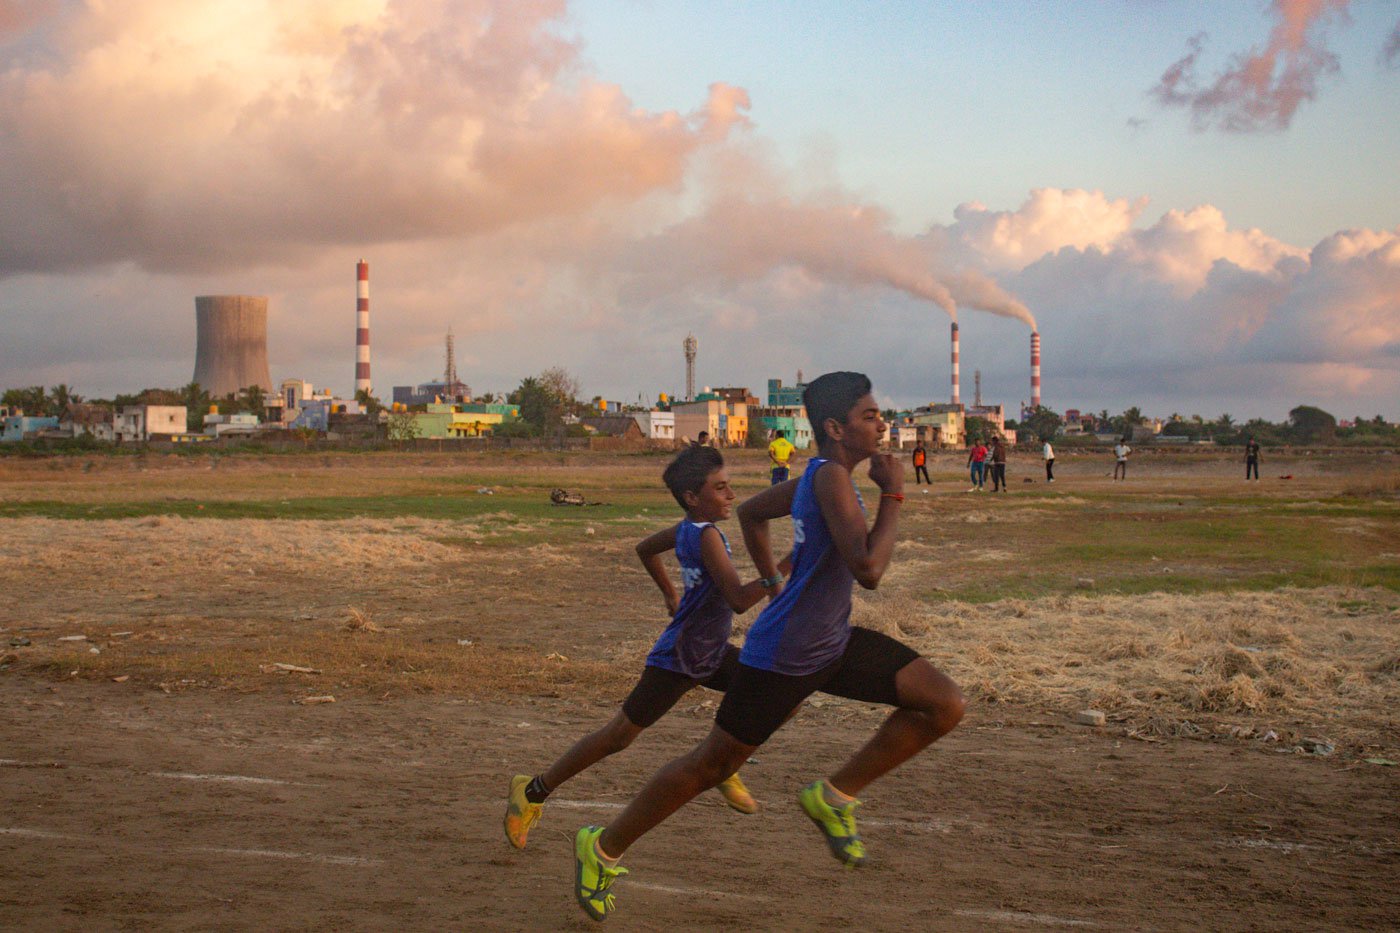 Young sportspersons from the community must train close to the industrial plants spewing toxic gases everyday.